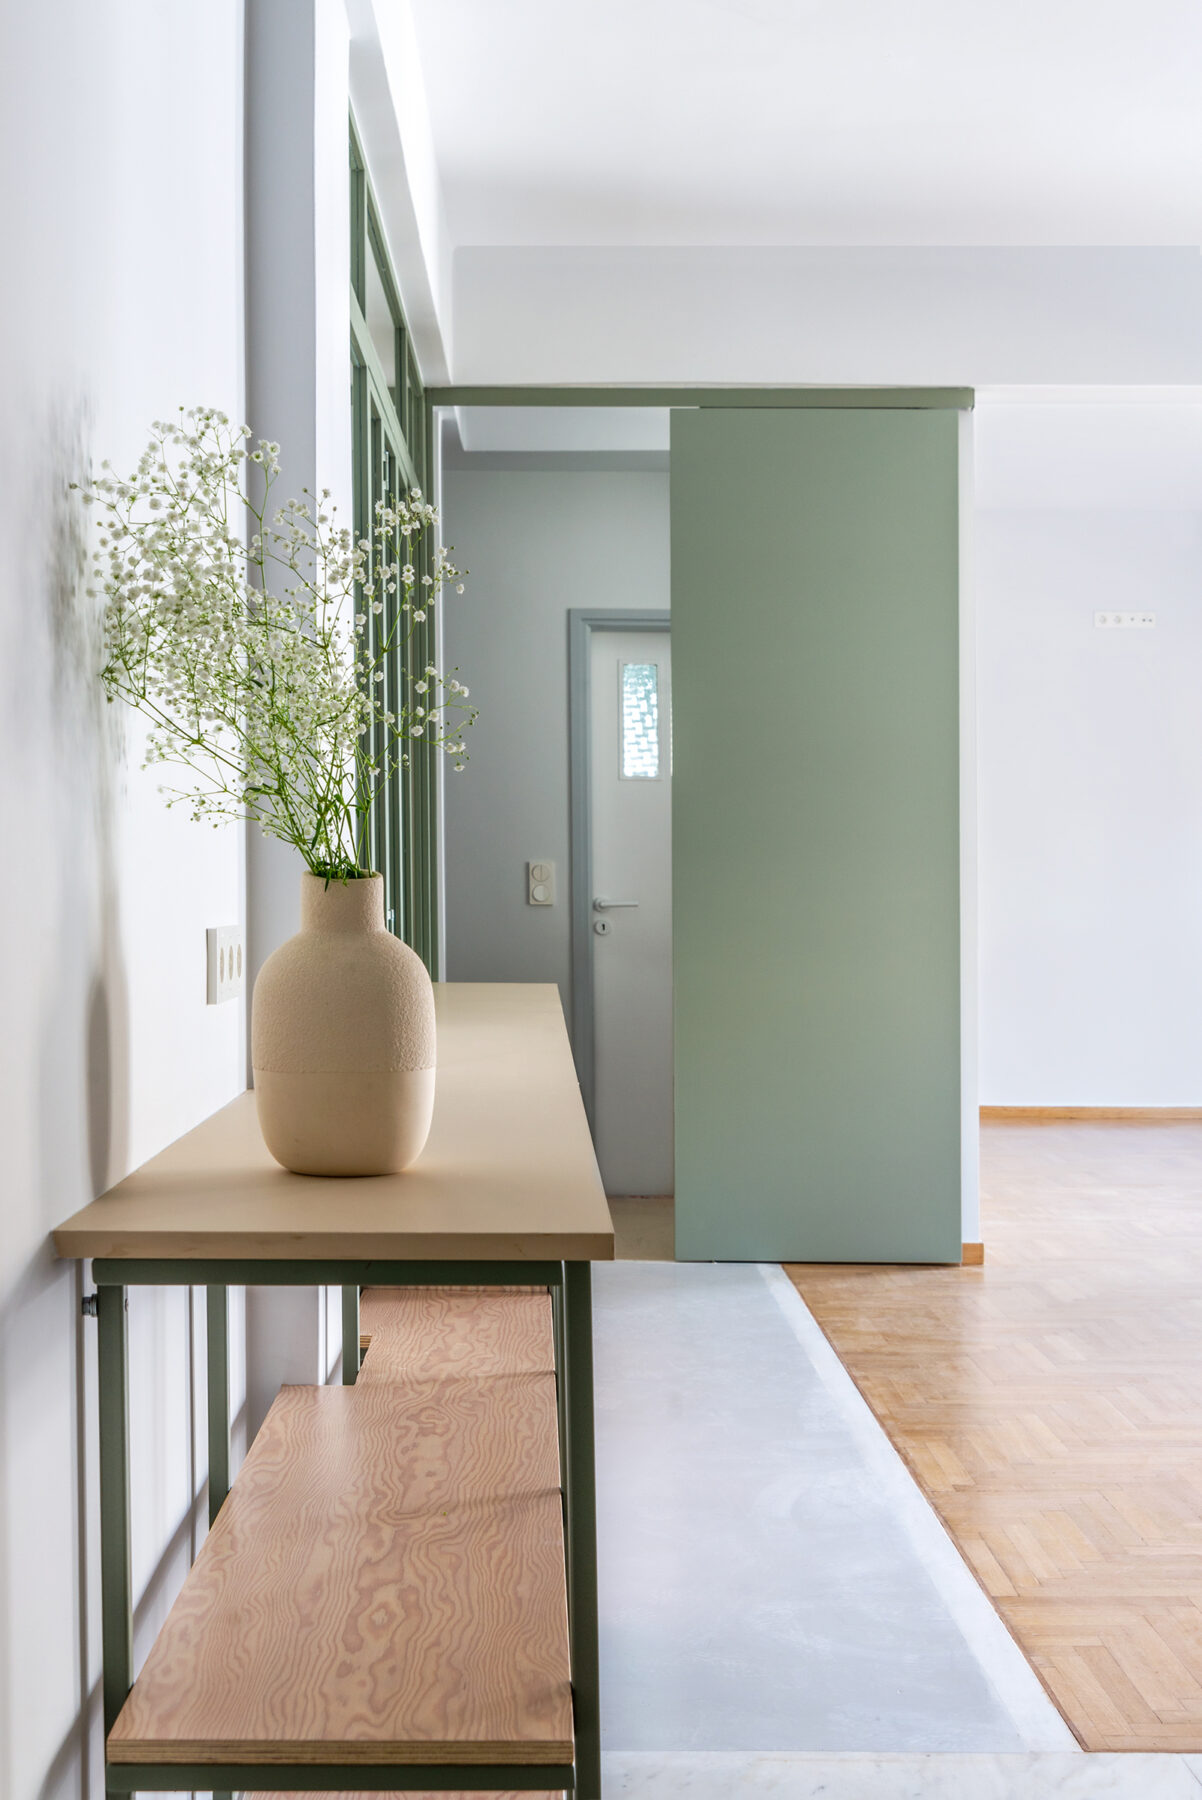 Archisearch Antiochias Apartment: that studio completed an earthy yet colourful renovation in Agios Panteleimonas, Athens